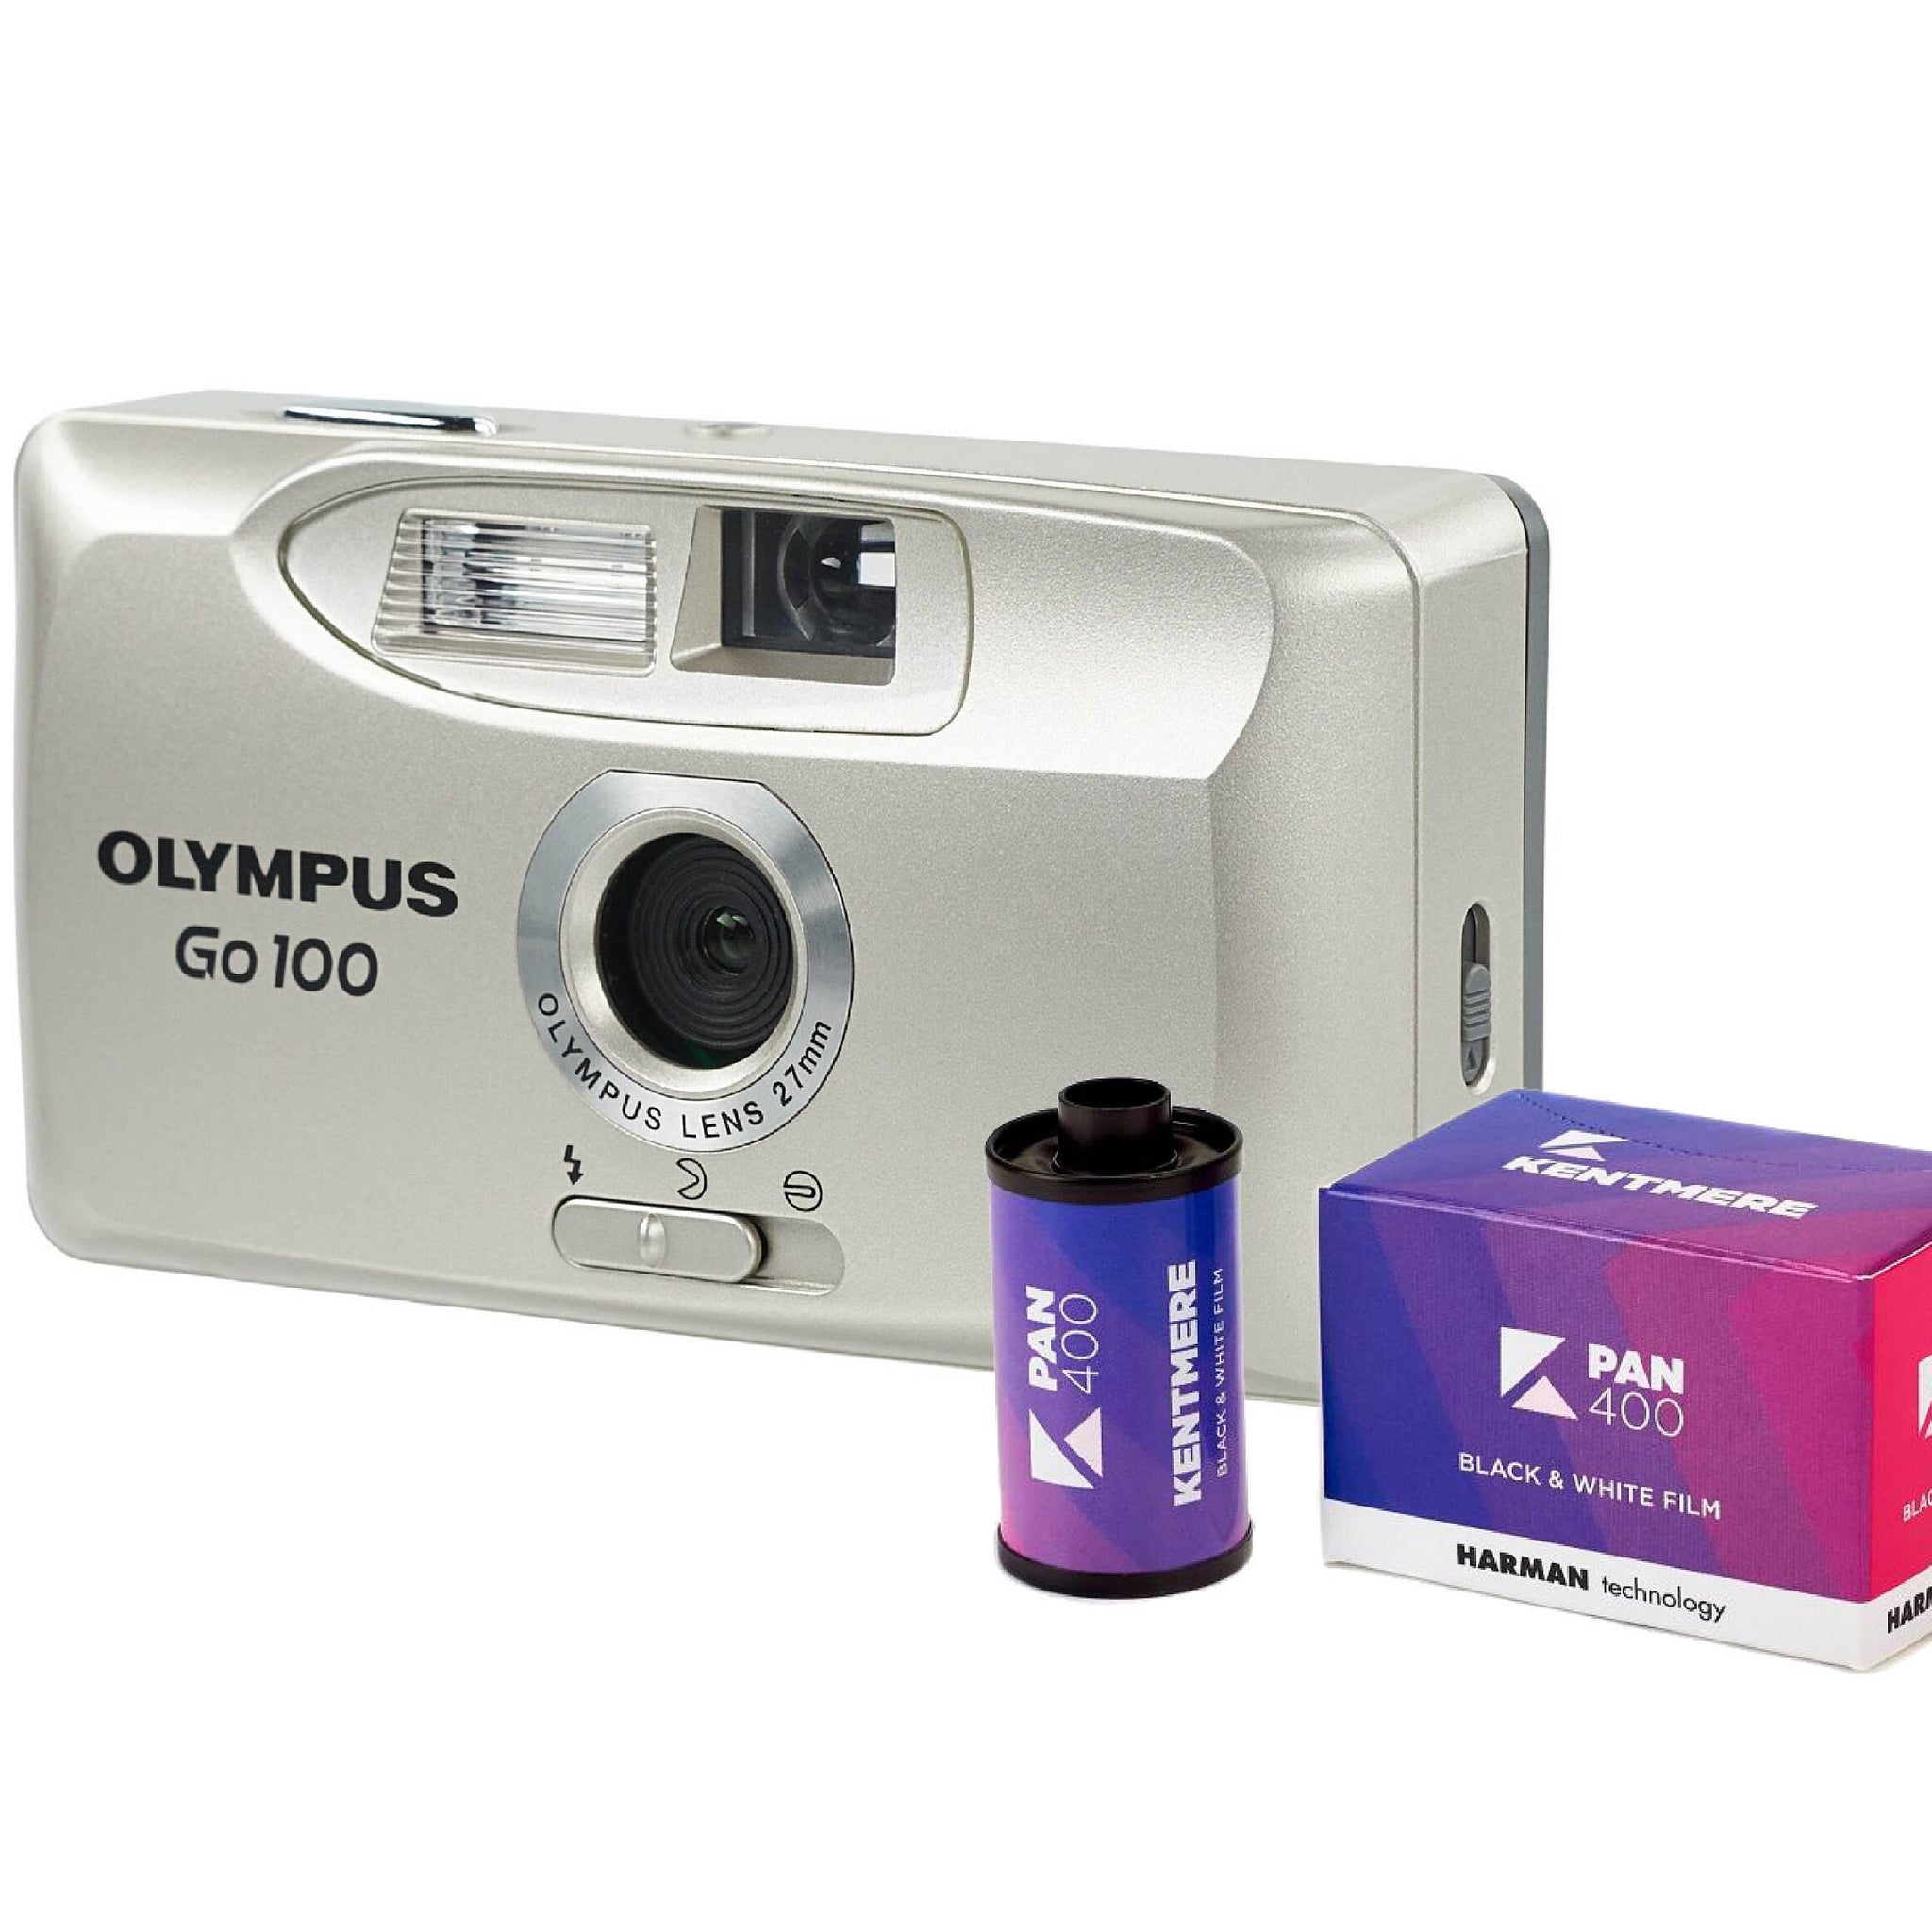 Olympus Go 100 Vintage Camera, Point and Shot Camera, Working Film Camera, Vintage Point & Shoot 35mm film camera - Vintage Polaroid Instant Cameras